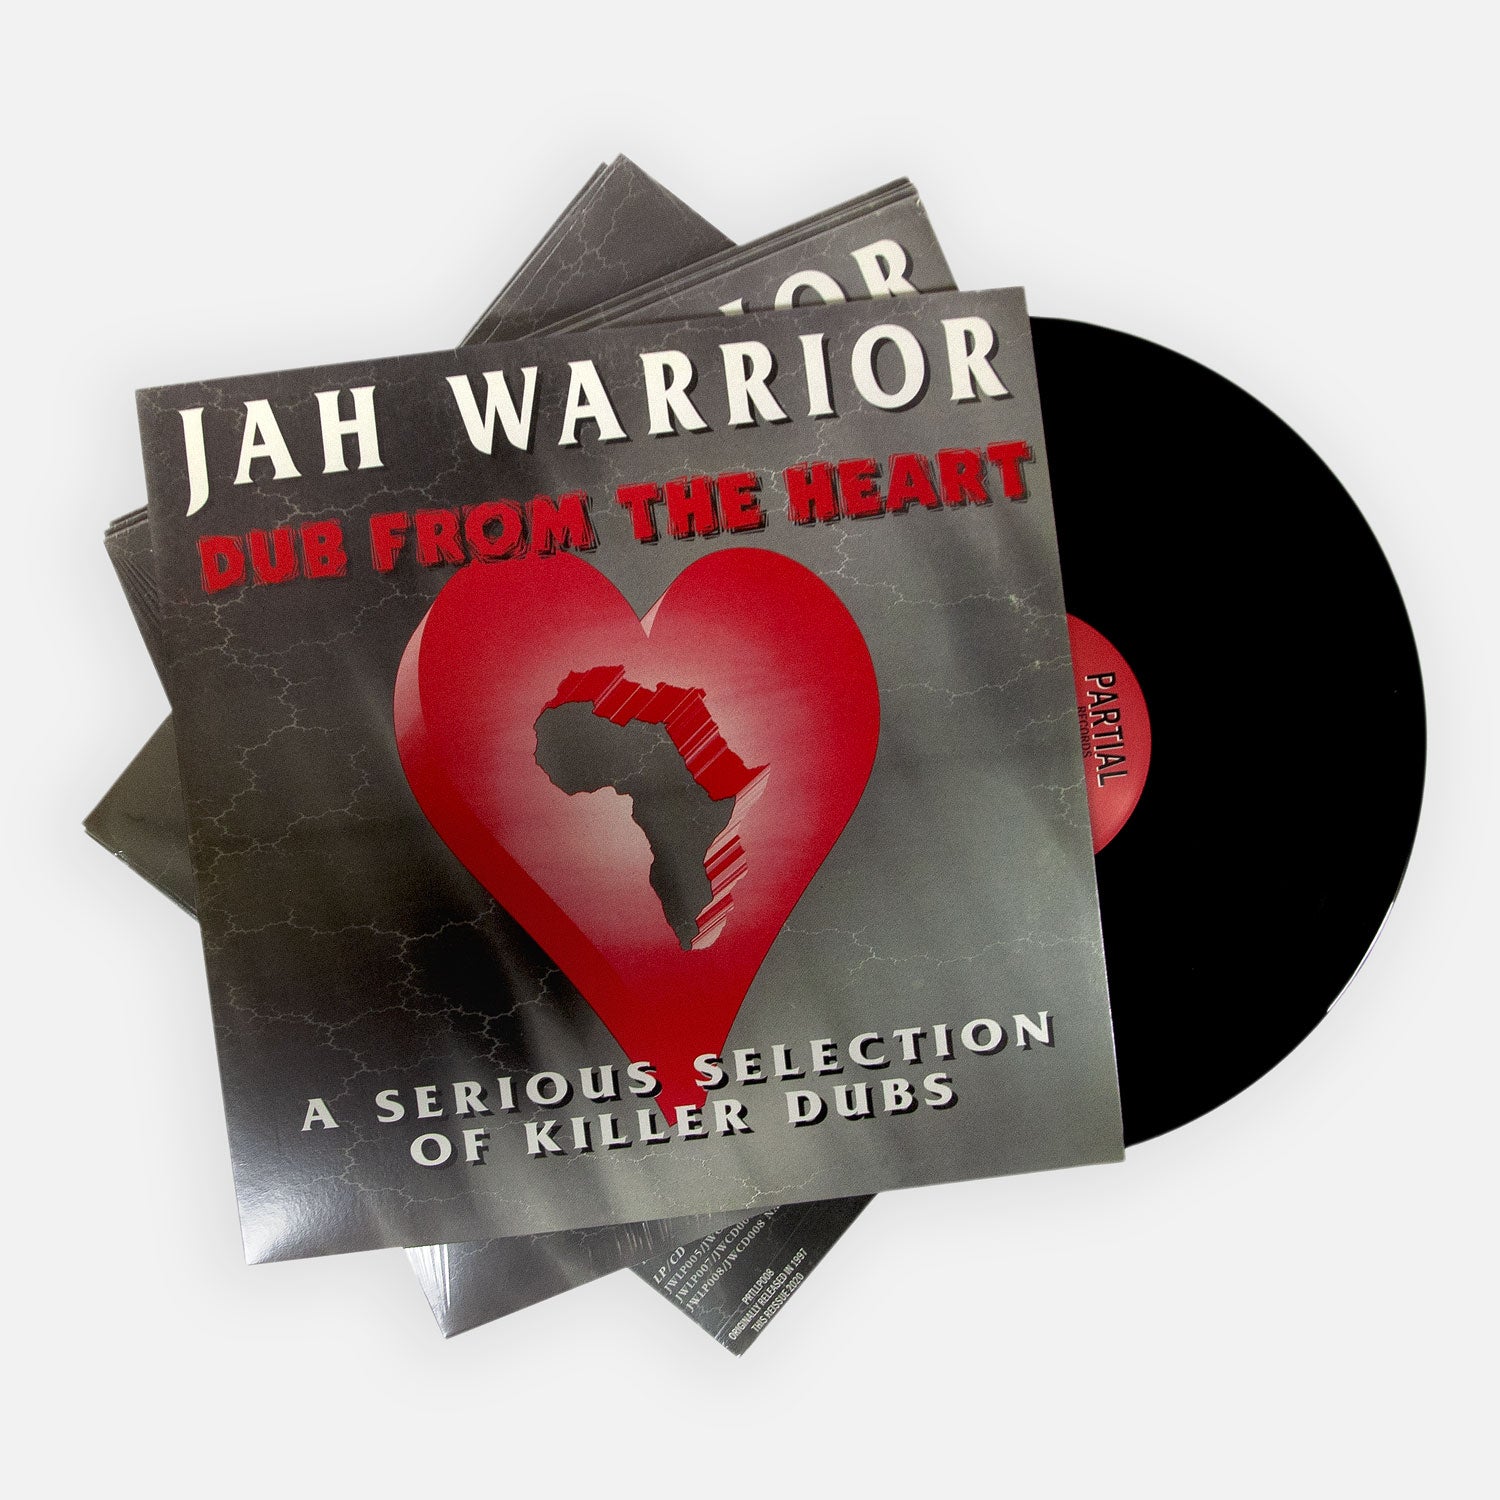 Dub-from-the-heart-LP